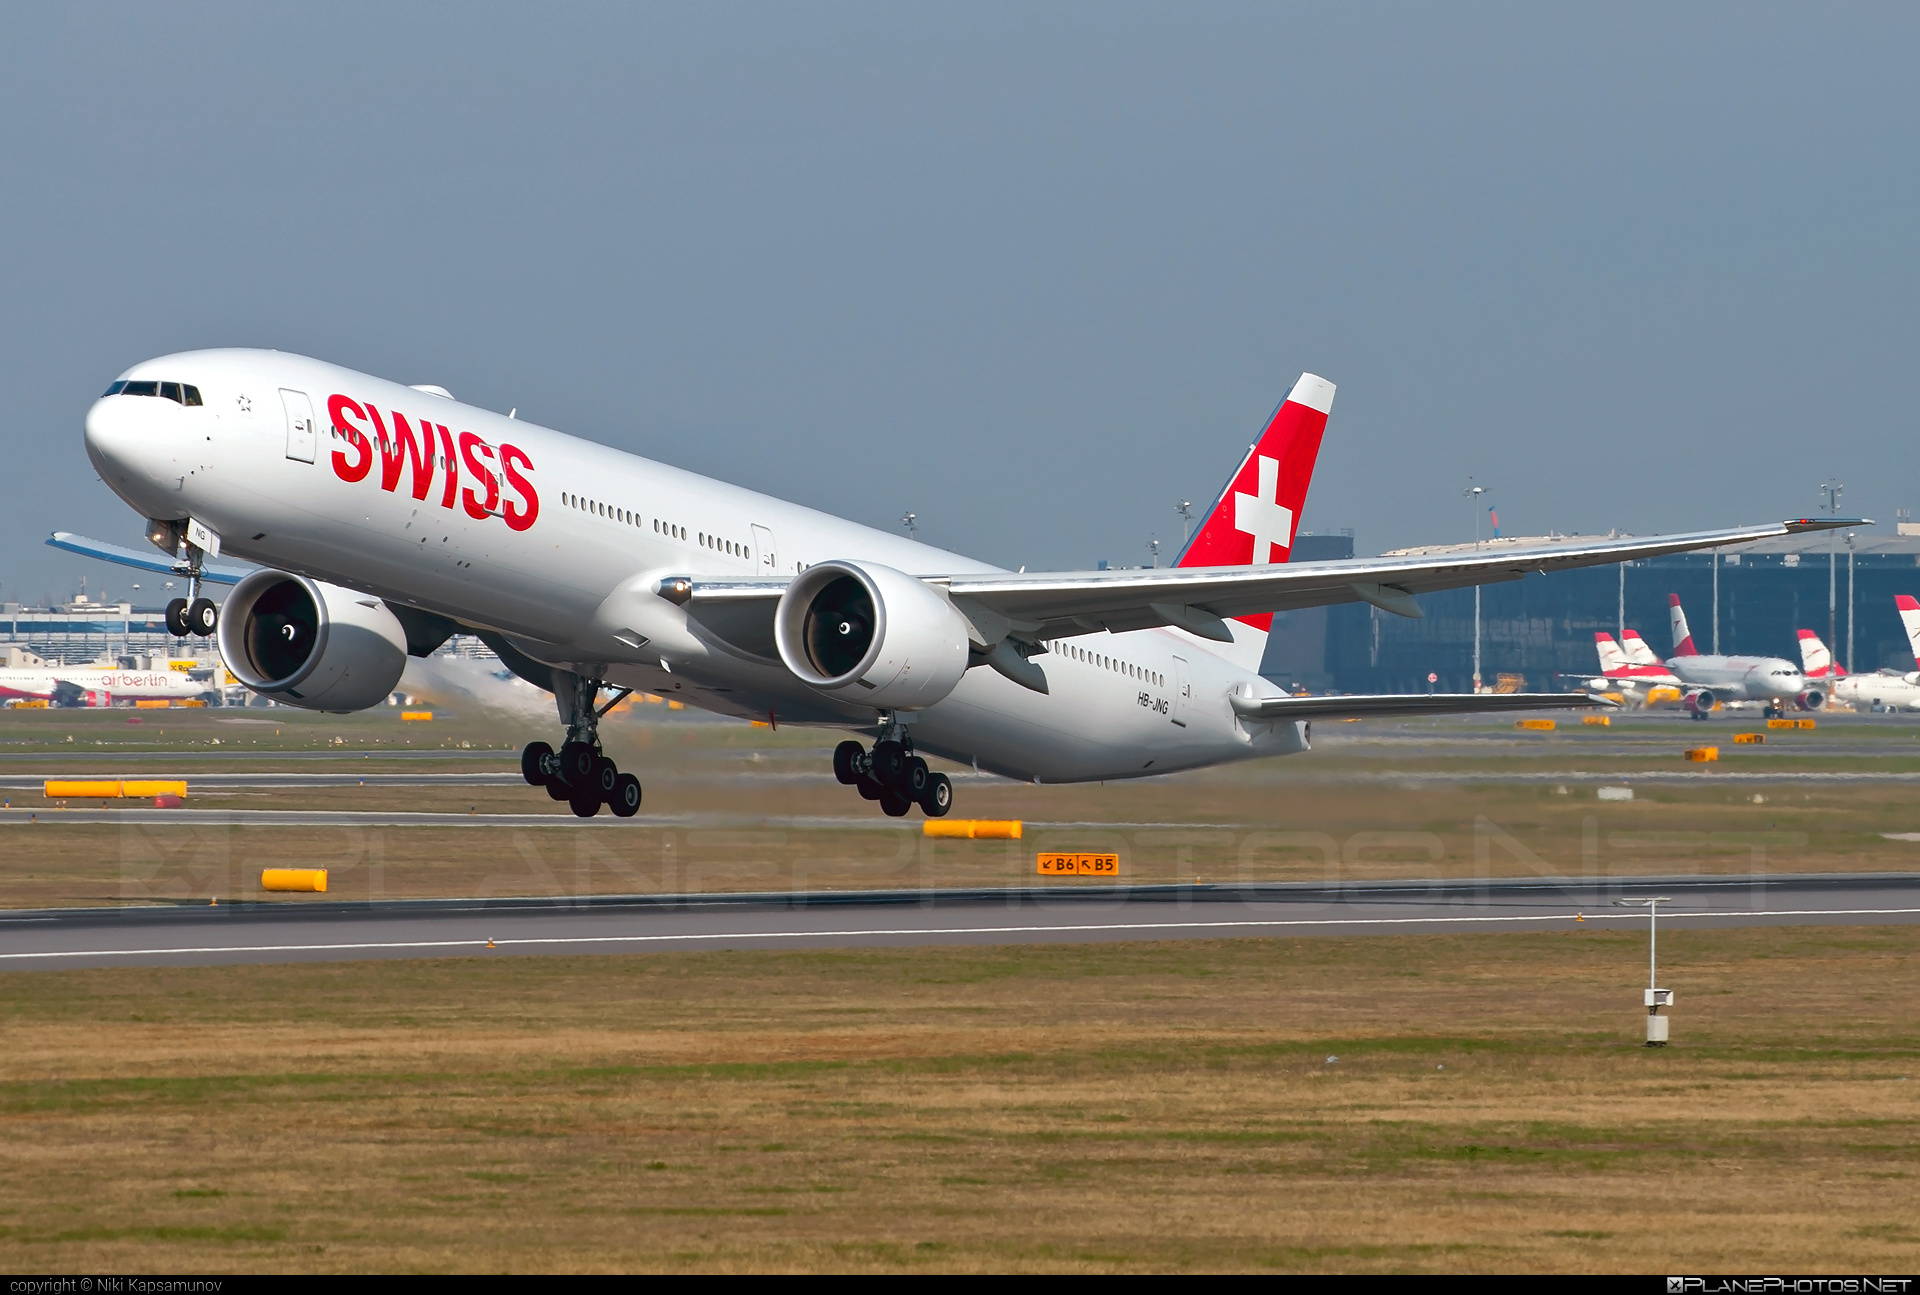 Boeing 777-300ER - HB-JNG operated by Swiss International Air Lines #b777 #b777er #boeing #boeing777 #swiss #swissairlines #tripleseven